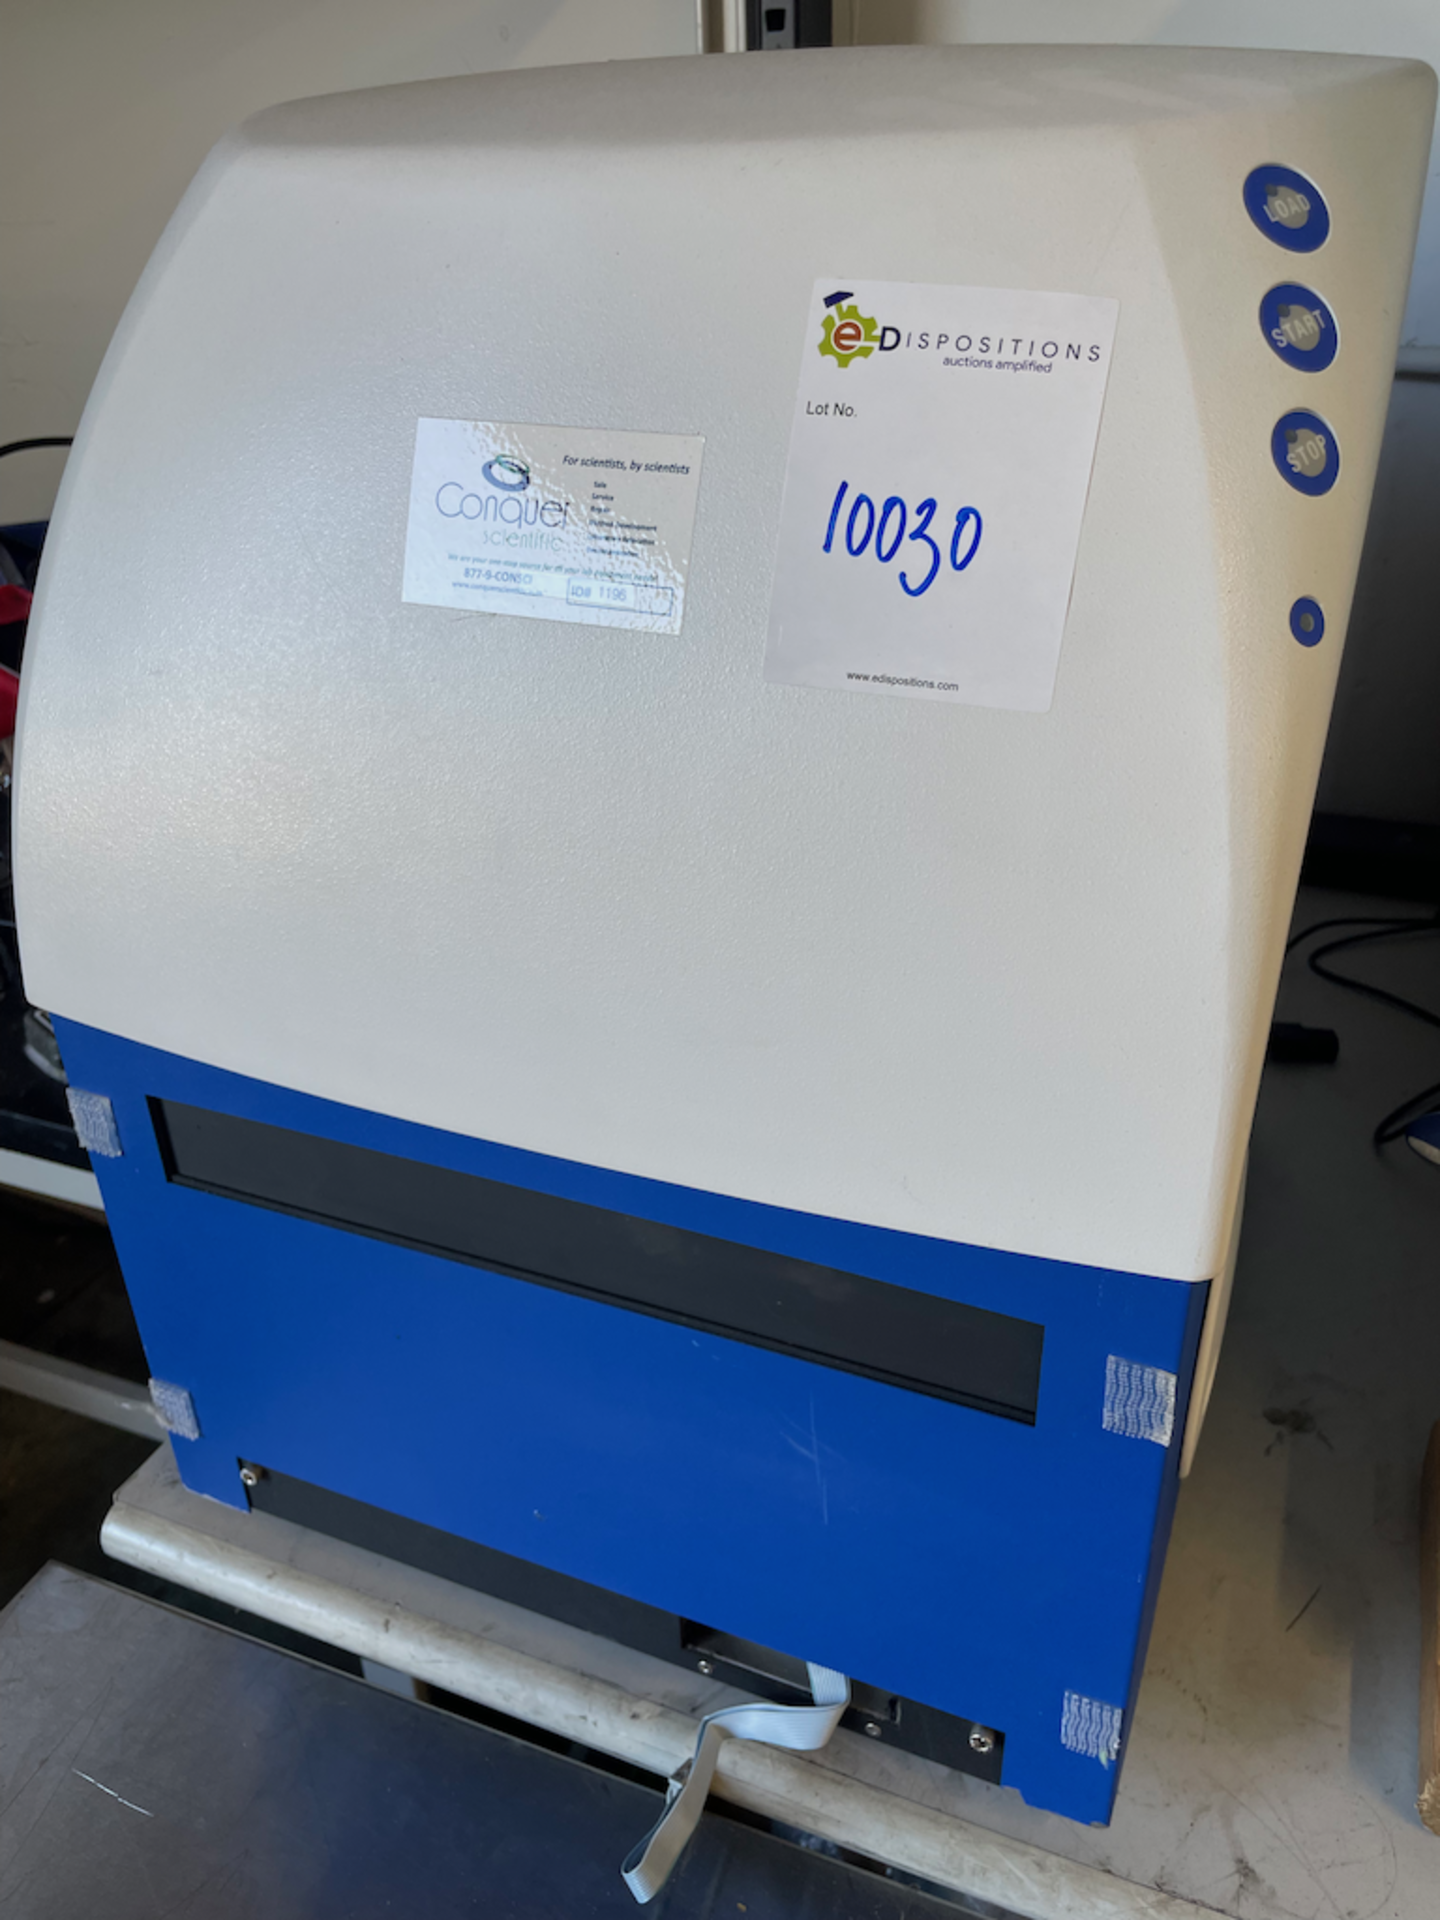 WALLAC EVISION 2100 MULTI LABEL PLATE READER - LOCATED AT 1218 ALDERWOOD AVE. SUNNYVALE, CA 94089 - Image 2 of 3